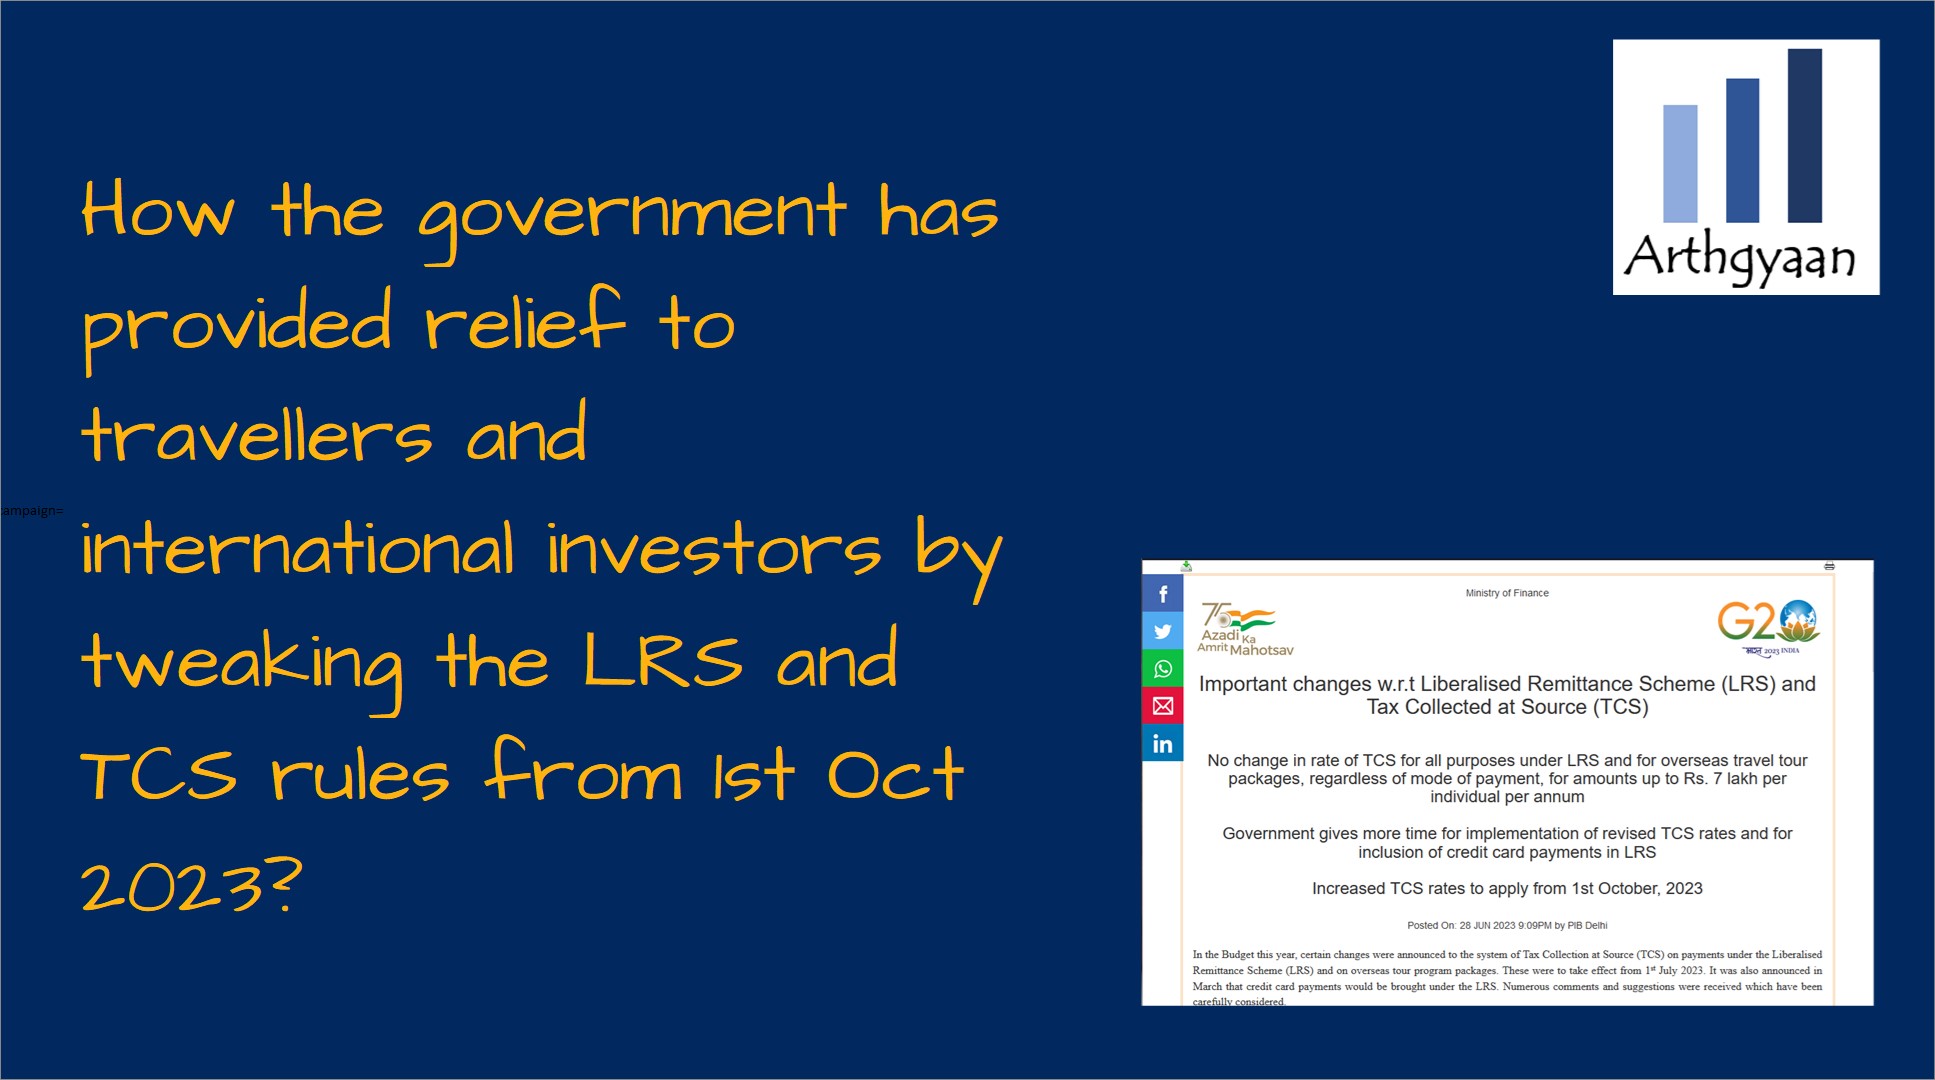 How the government has provided relief to travellers and international investors by tweaking the LRS and TCS rules from 1st Oct 2023?